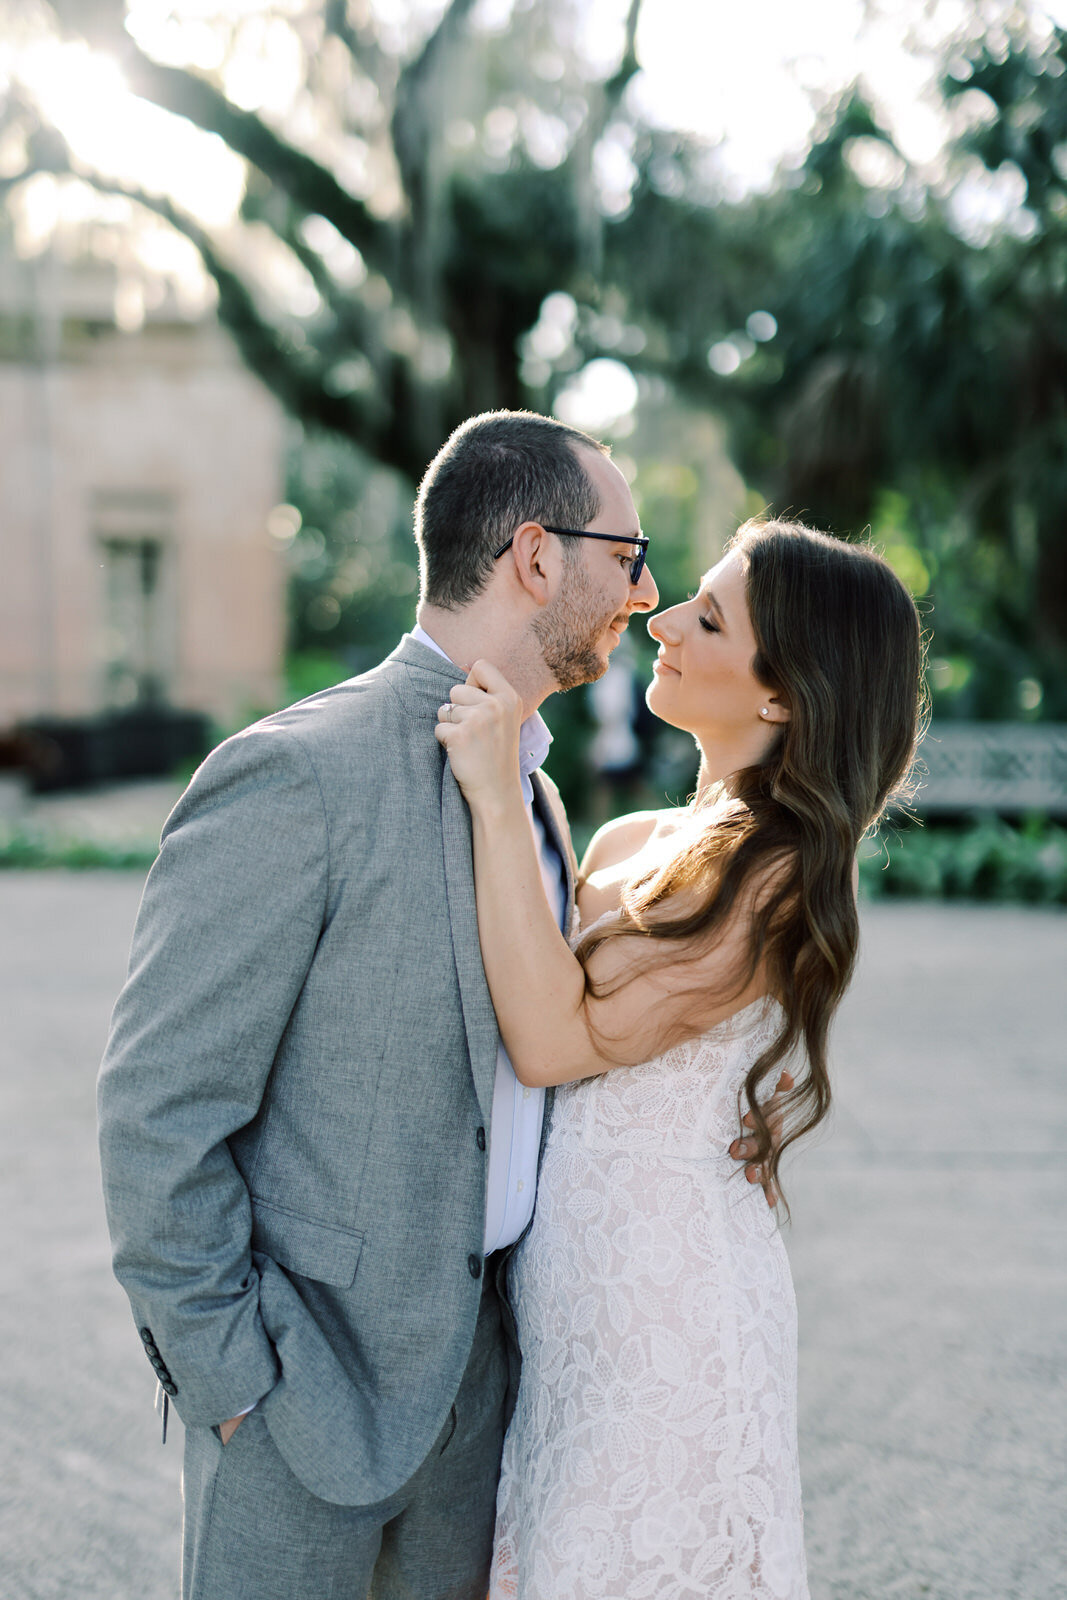 A Stylish and Chic Engagement Session at Vizcaya Museum in Miami Florida 25